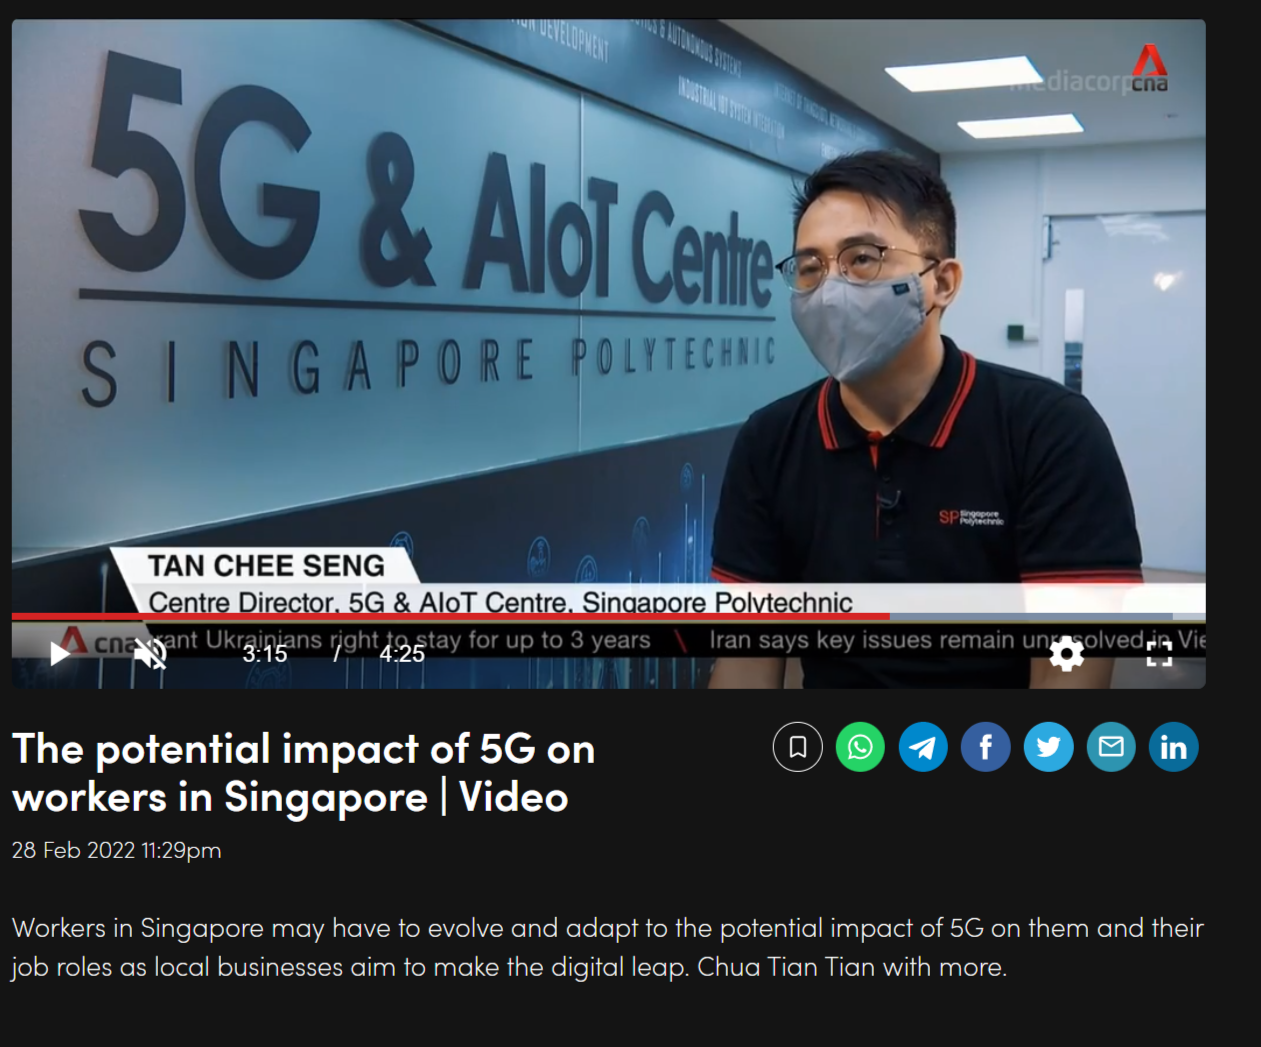 FireShot Capture 062 - The potential impact of 5G on workers in Singapore - Video - CNA_ - www.channelnewsasia.com